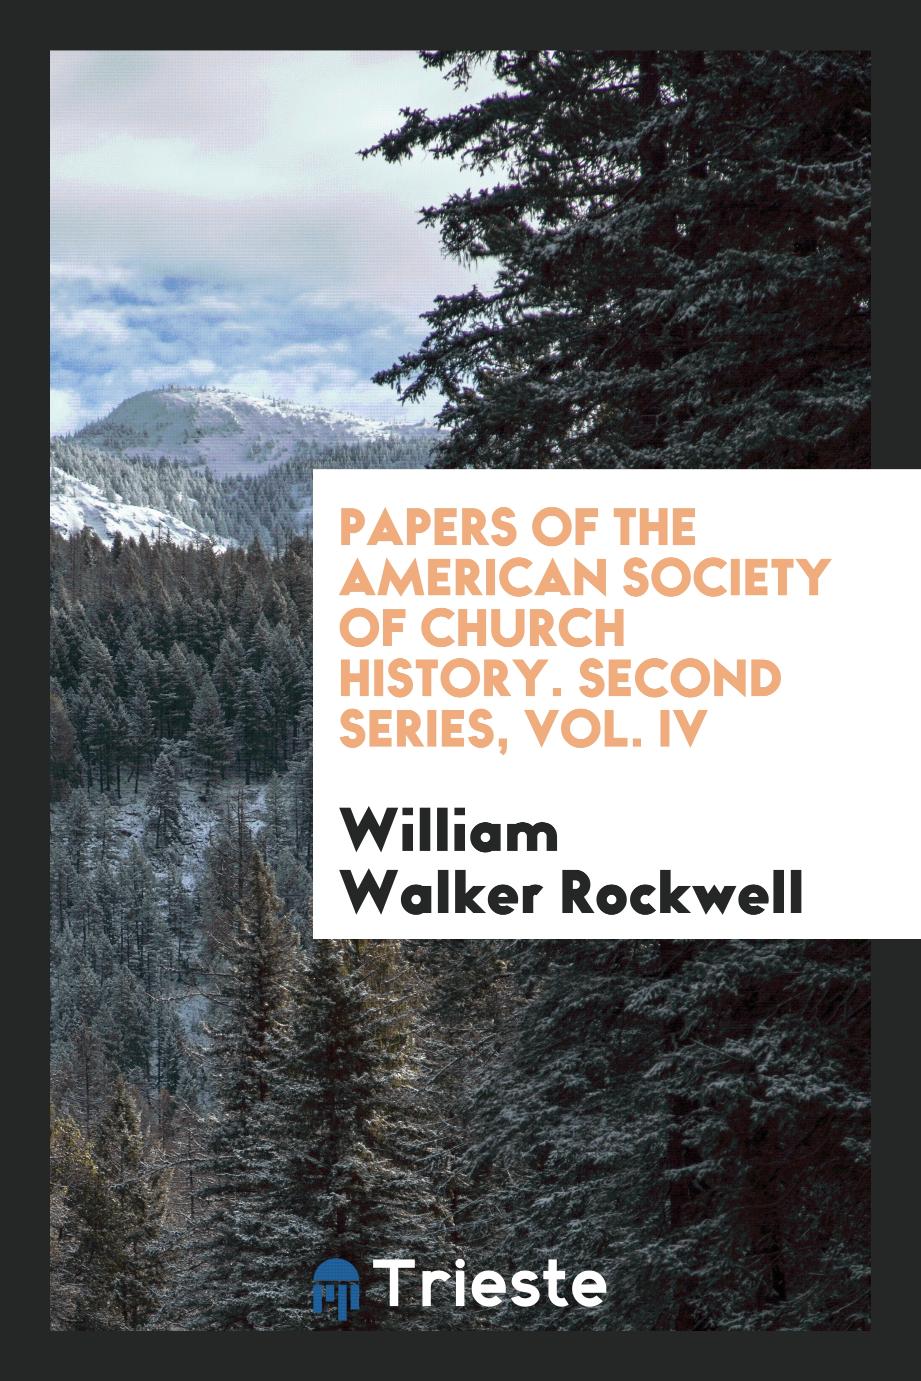 Papers of the American Society of Church History. Second Series, Vol. IV